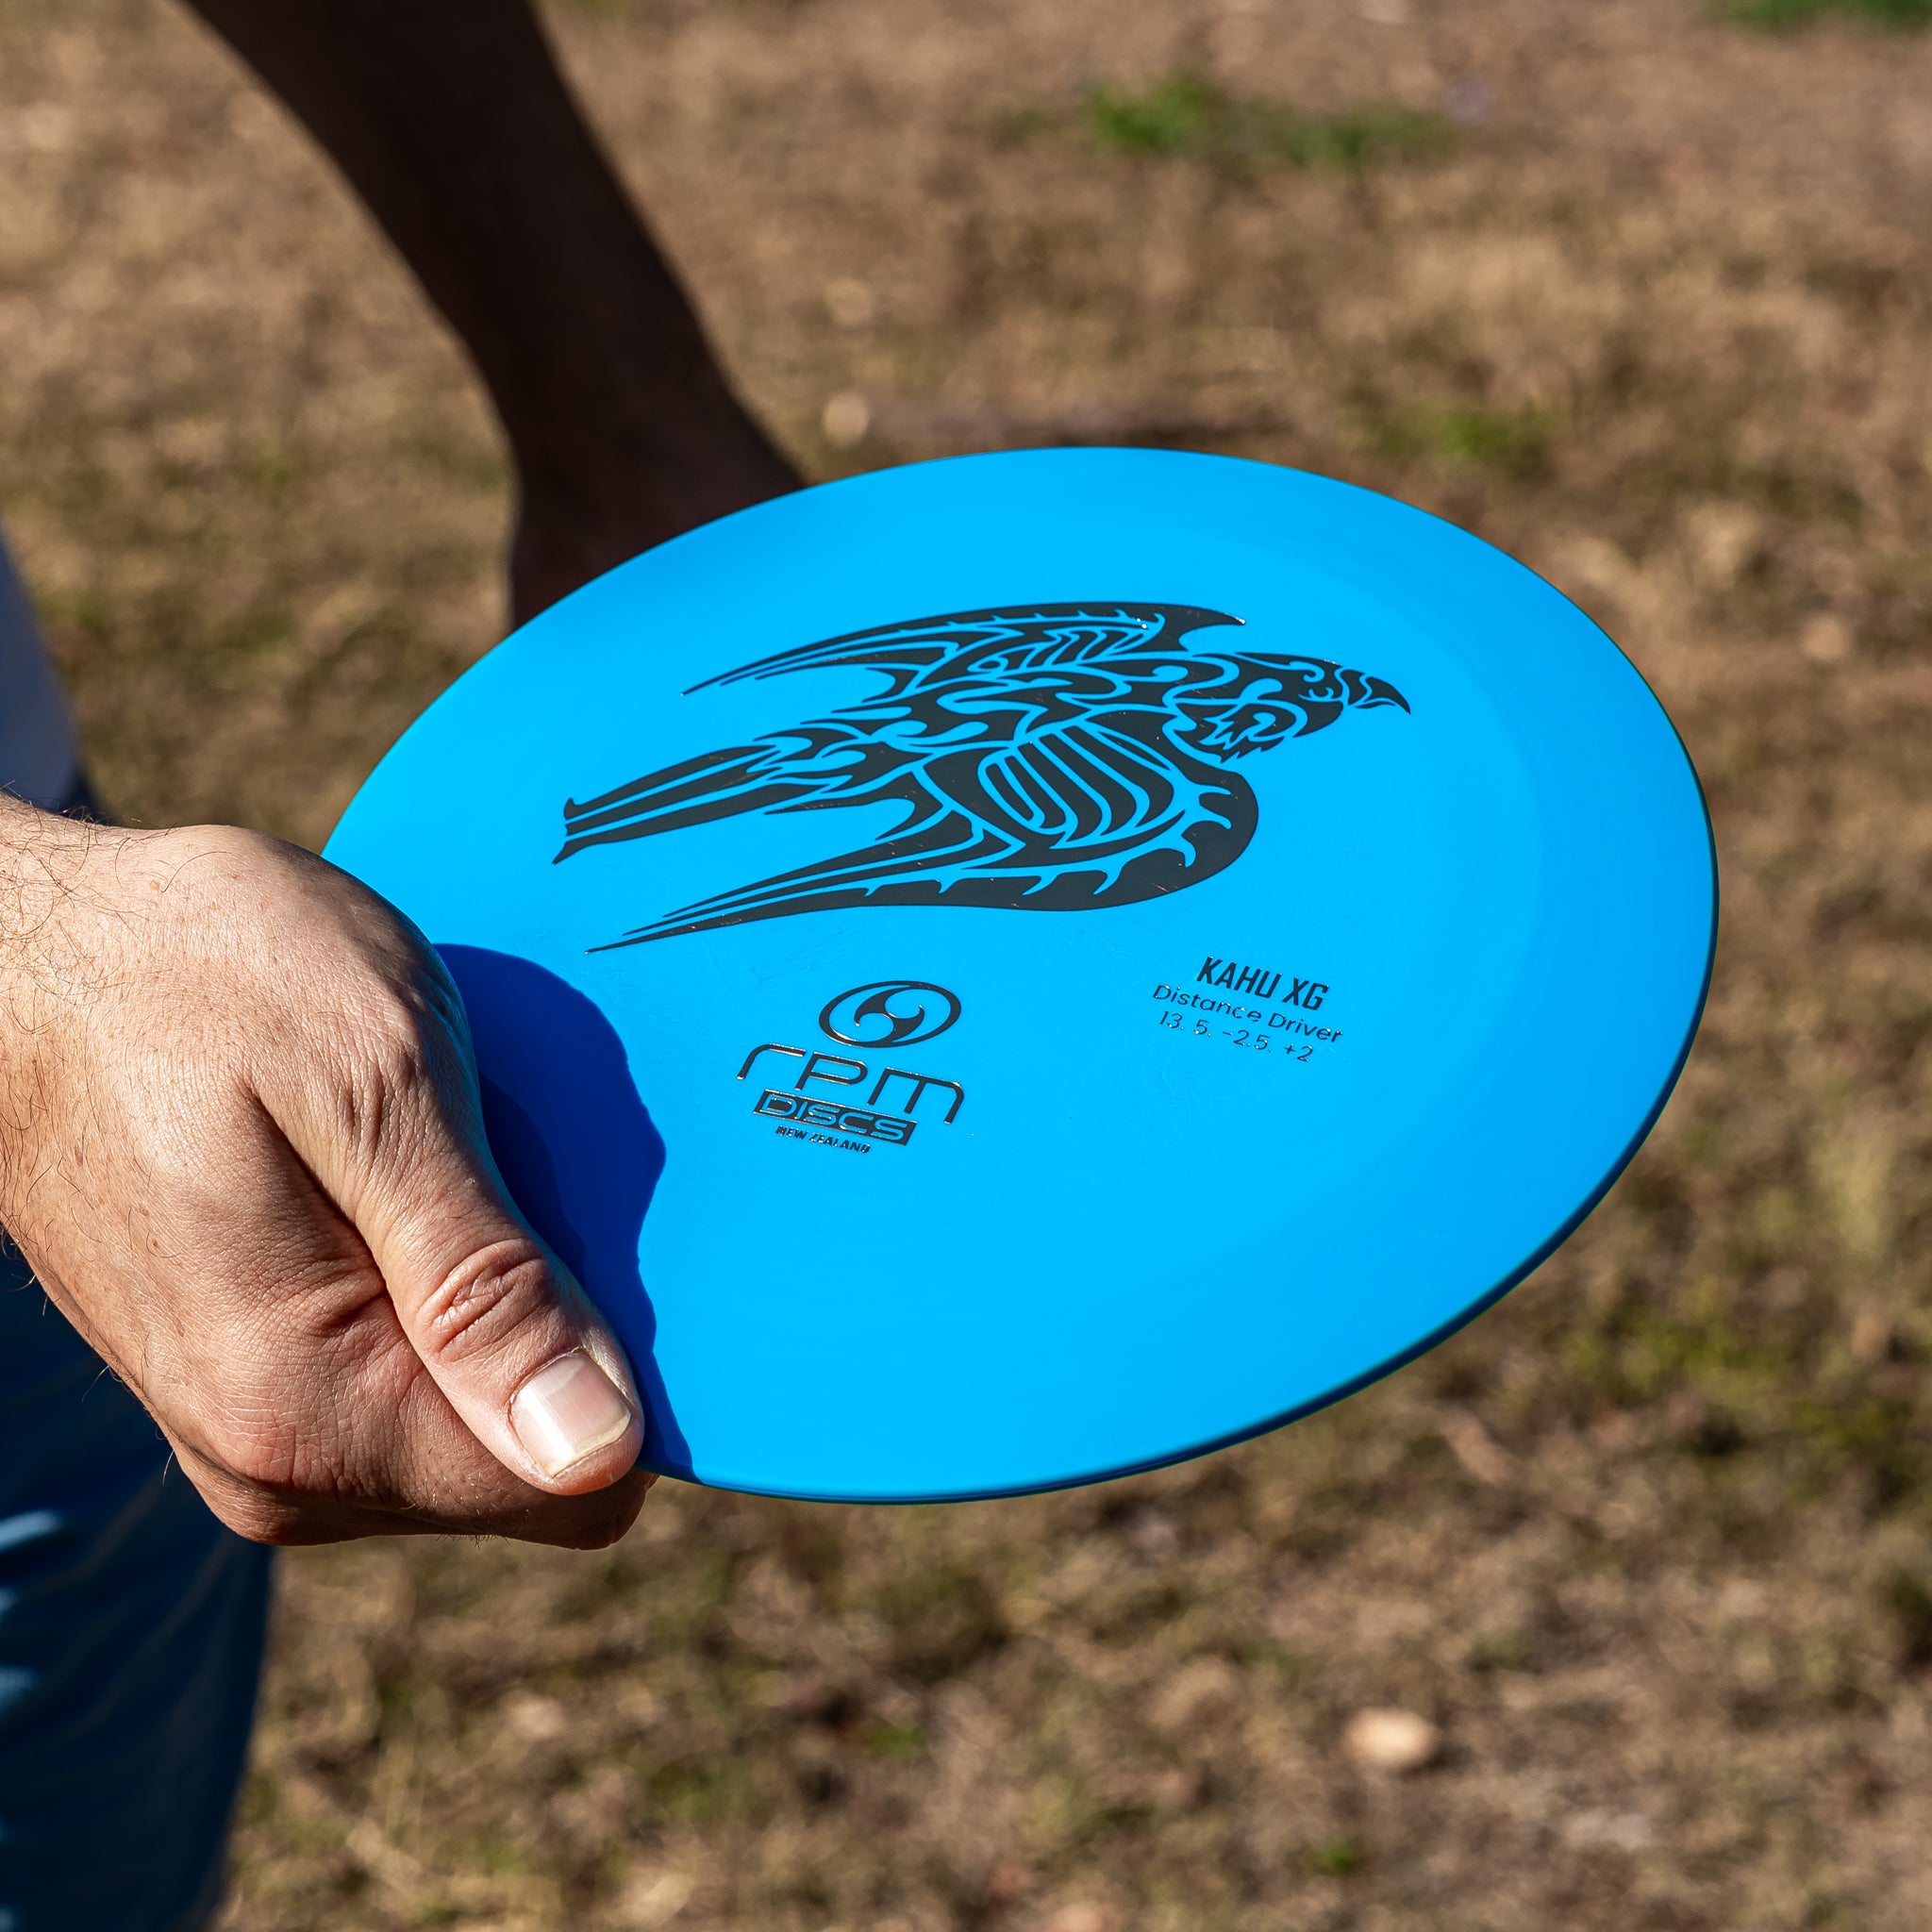 RPM Discs Kahu XG in Atomic being held ready to throw